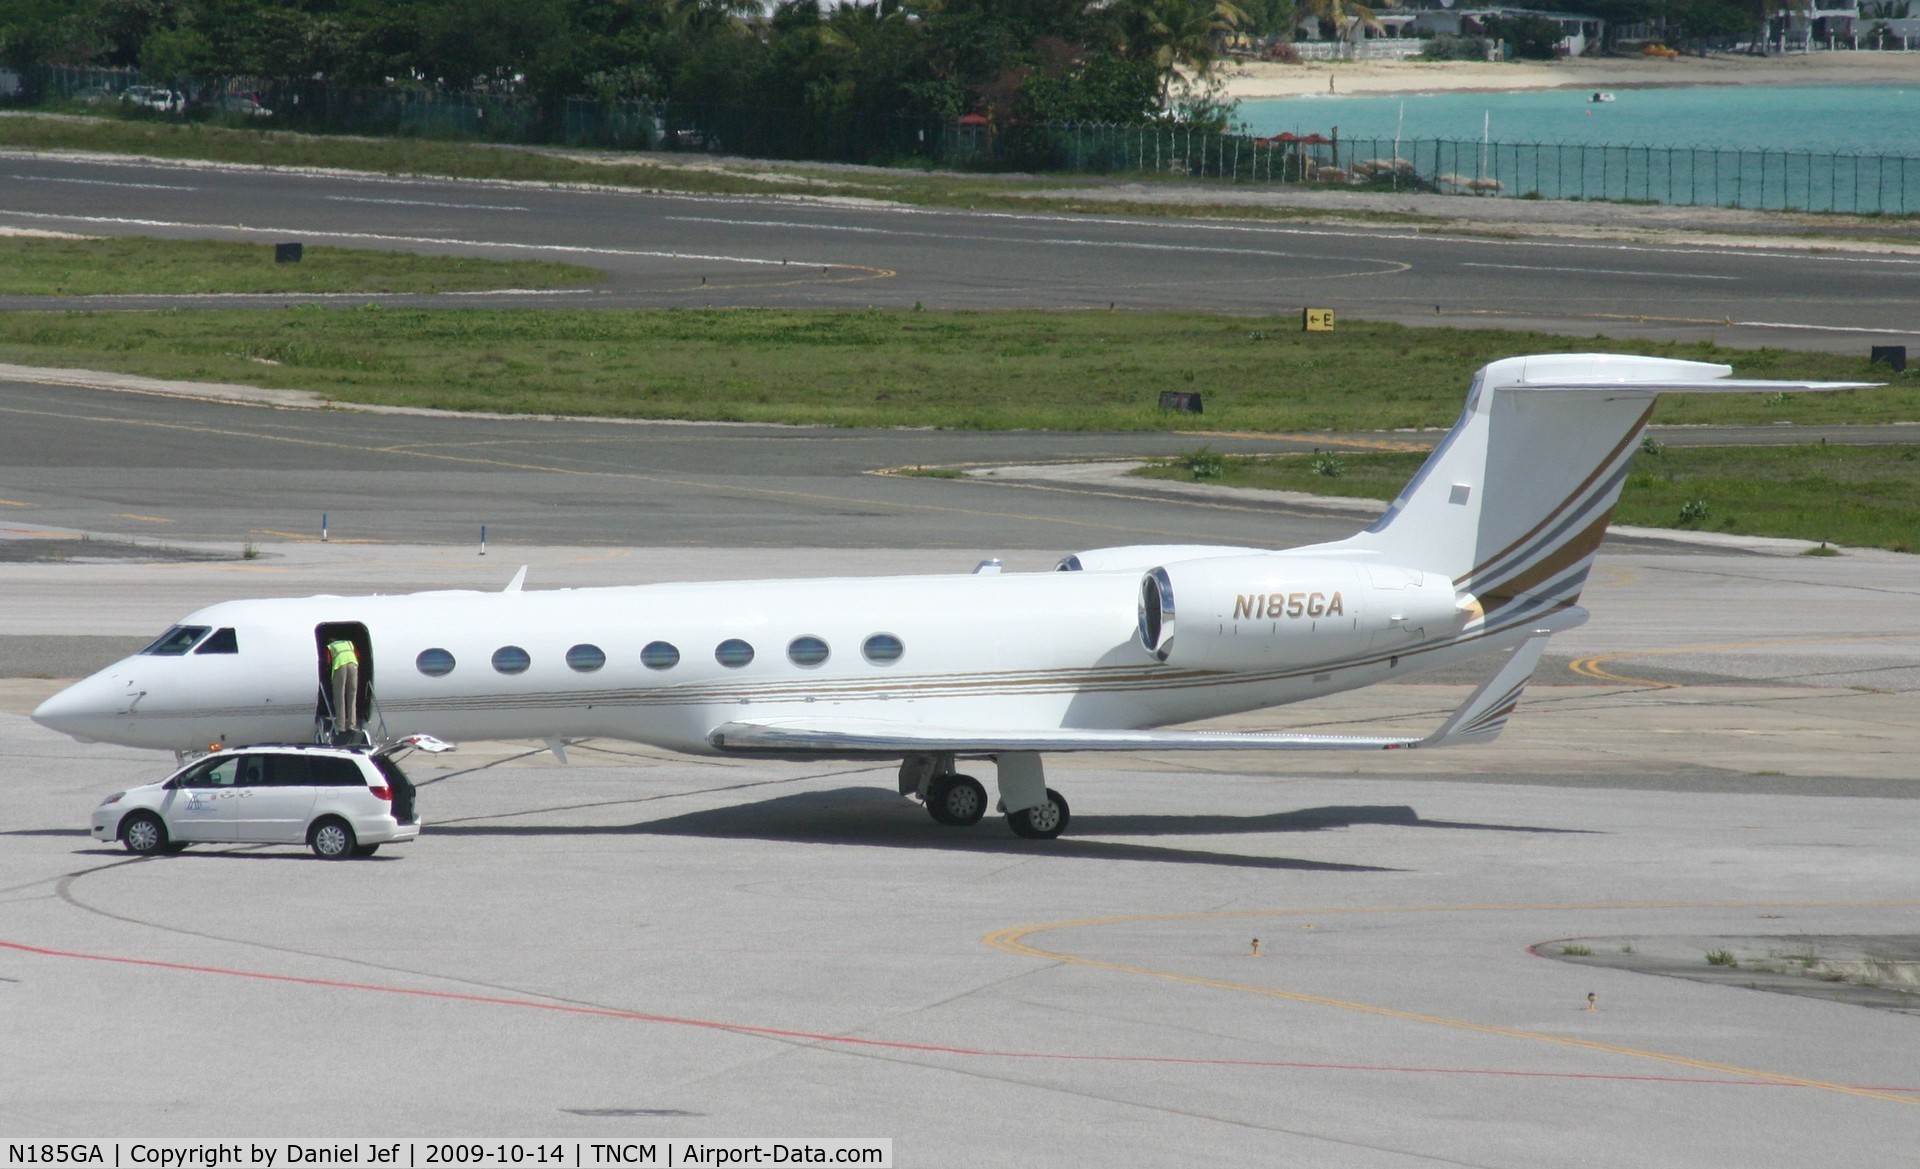 N185GA, 2008 Gulfstream Aerospace GV-SP (G550) C/N 5185, As you see they are being handle by ground handlers